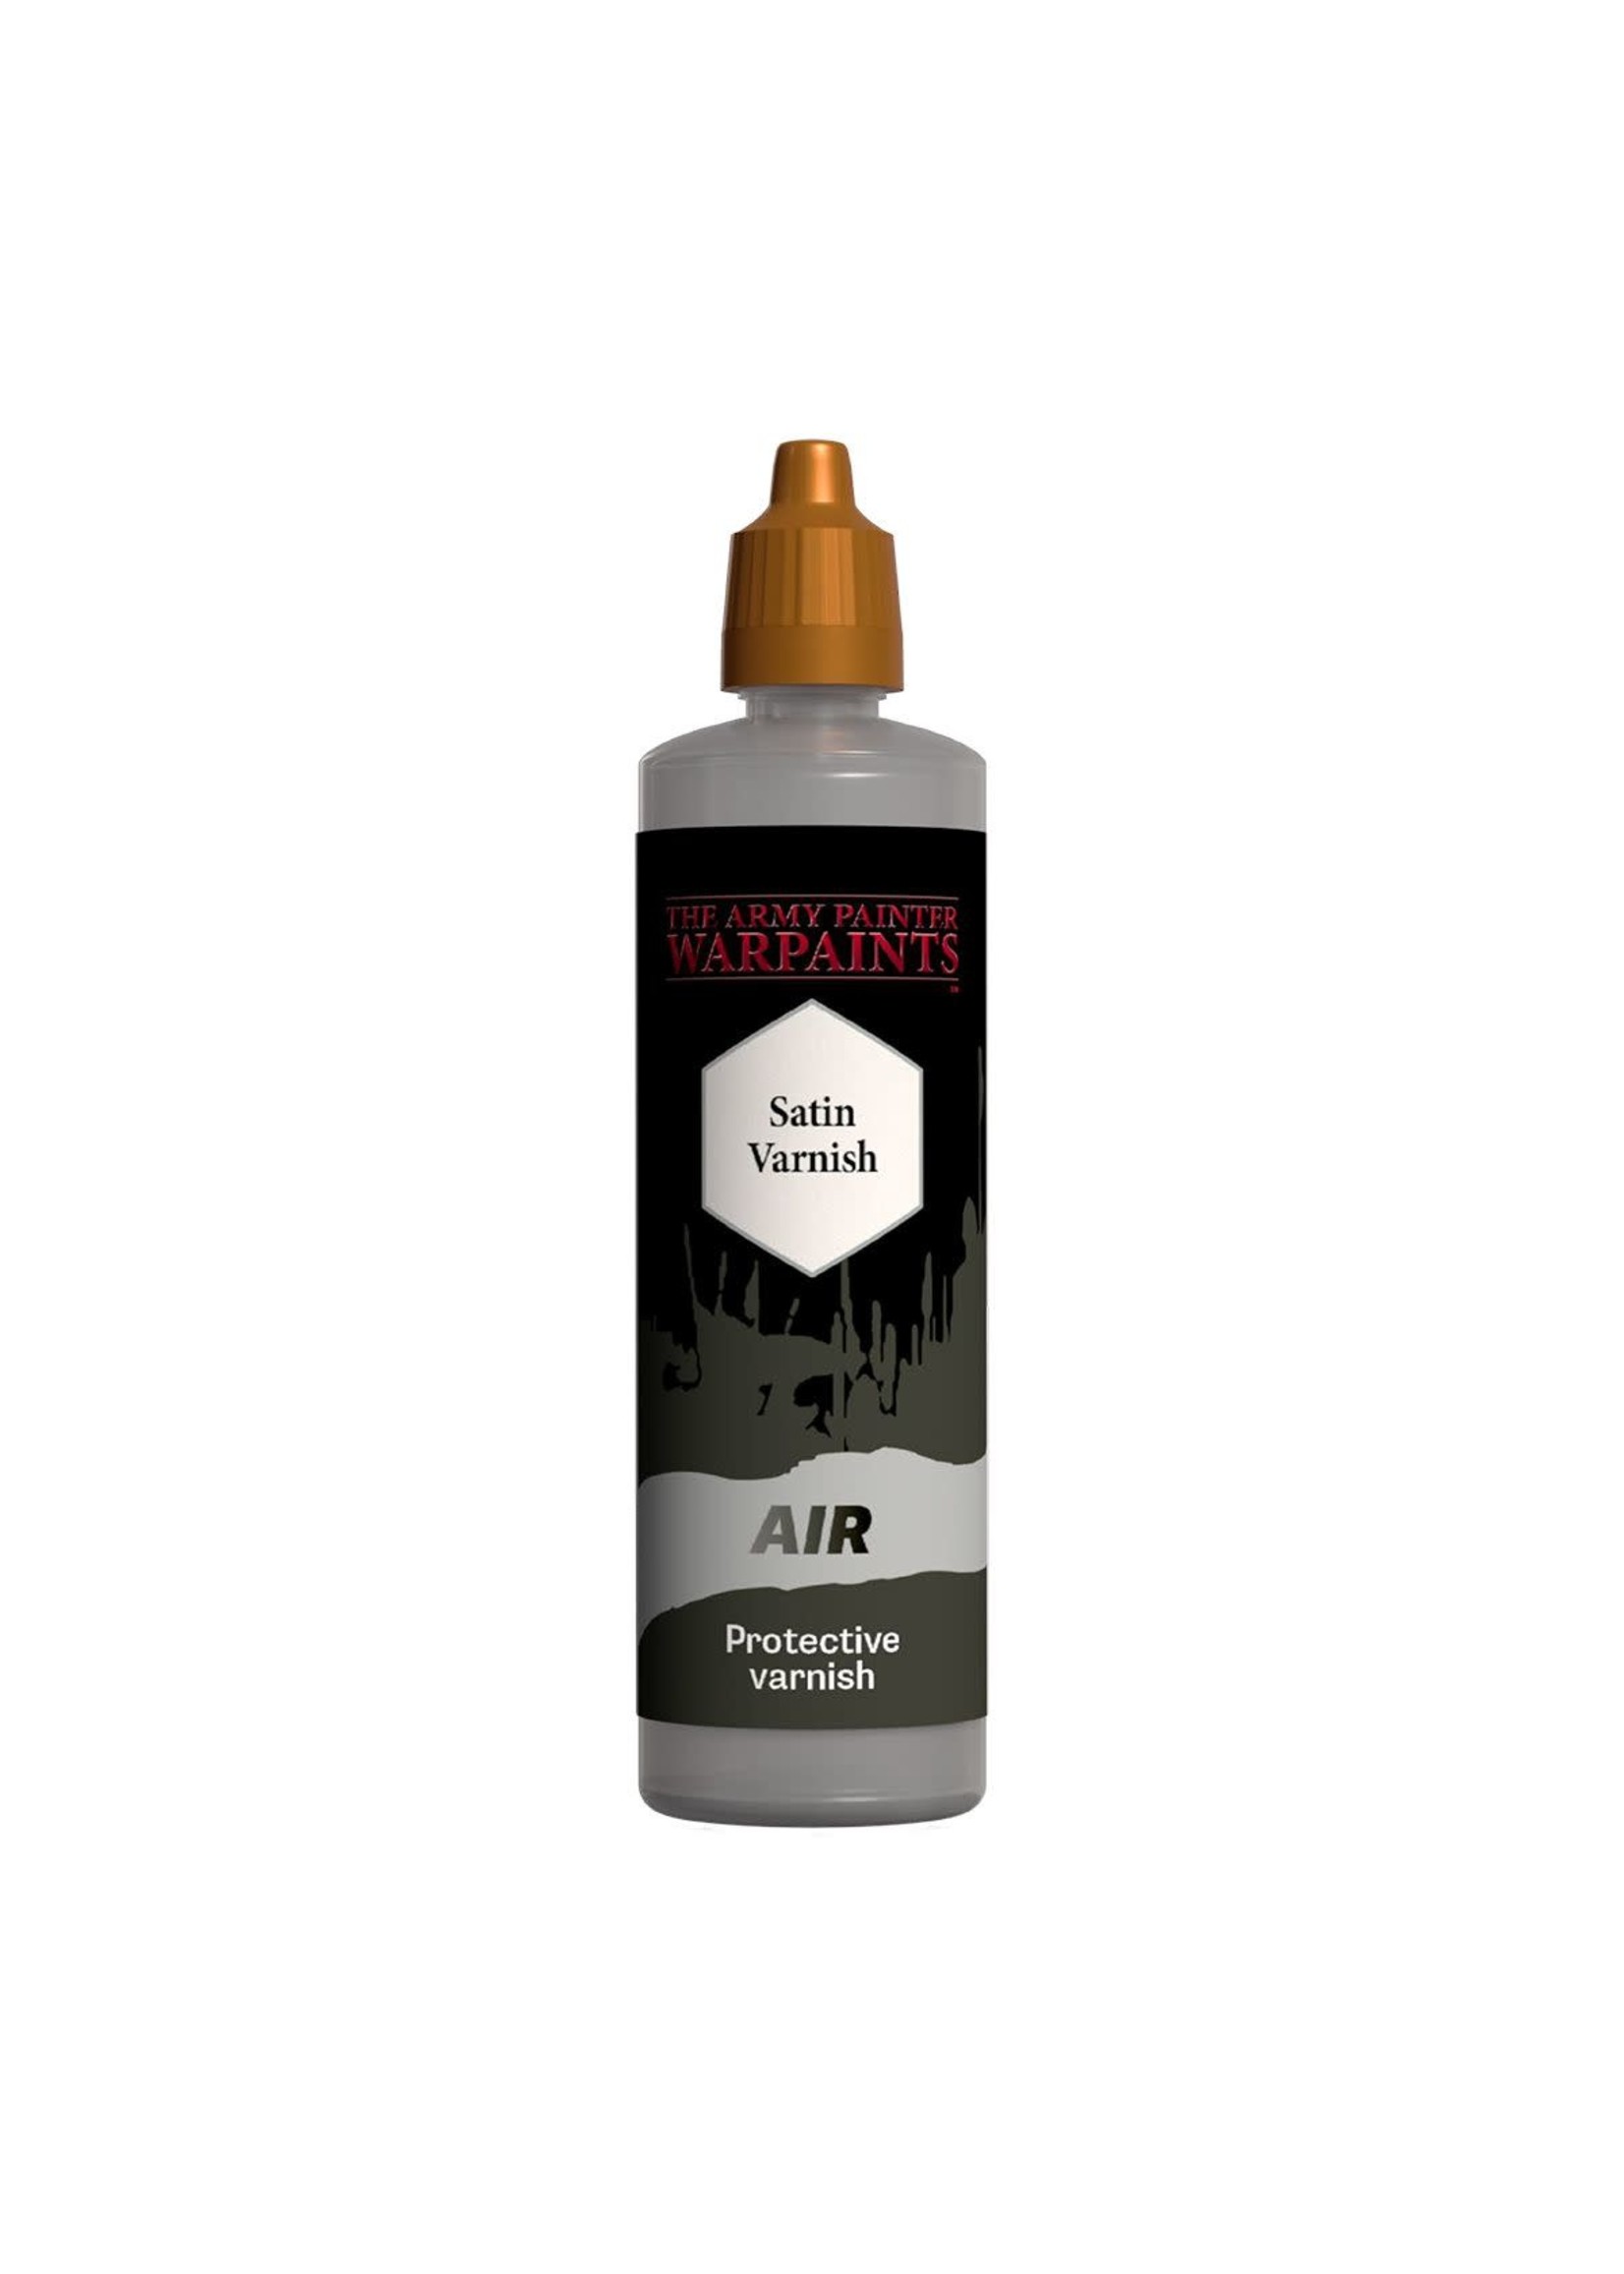 The Army Painter Air- Satin Varnish (Protective Varnish) - The Army Painter